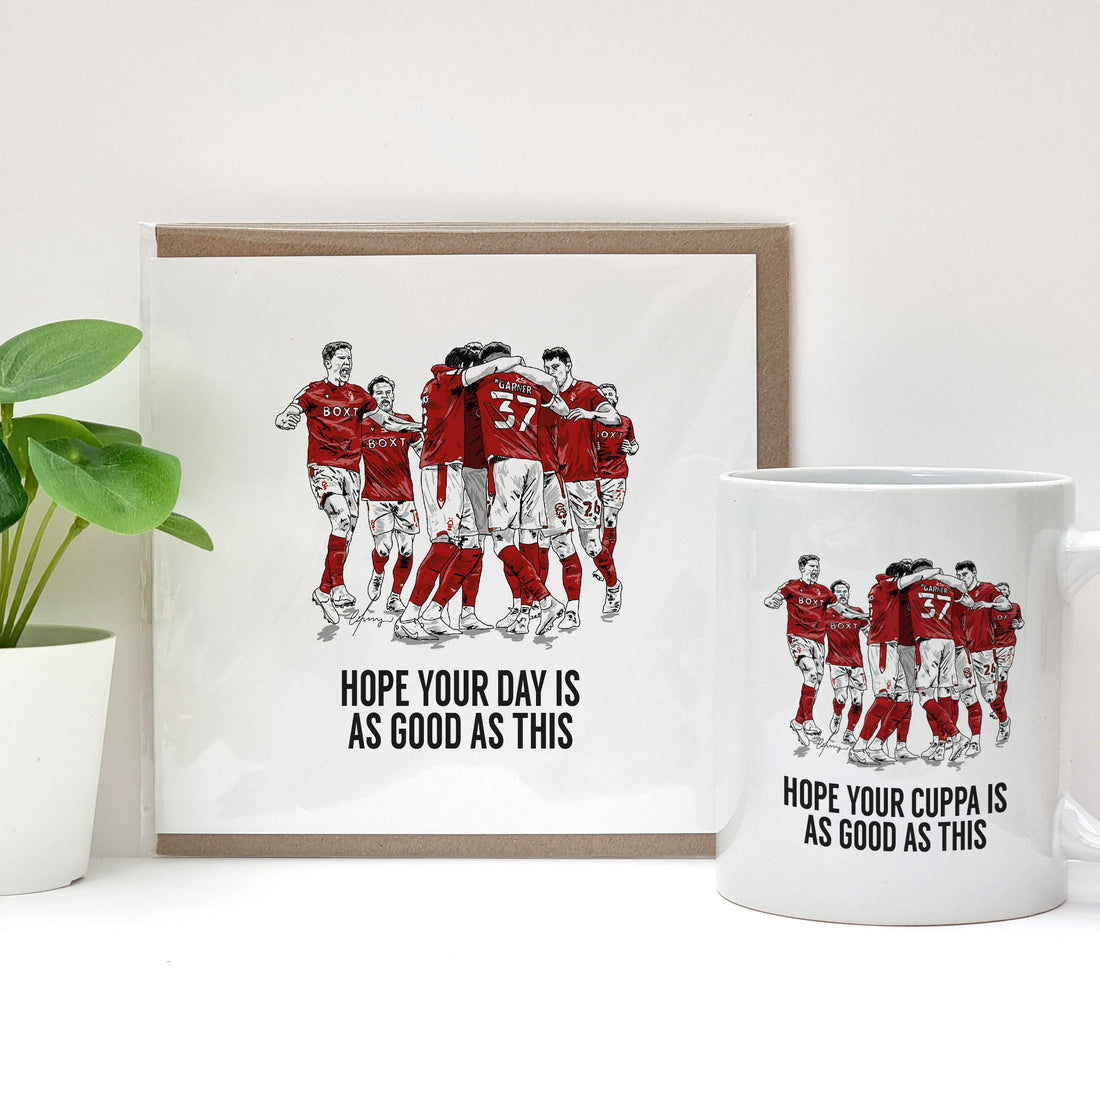 nottingham forest football club official greetings card and mug merchandise featuring an illustration of the players celebrating winning the championship play-off final and getting promoted to the premier league in 2022. Designed by a town called home